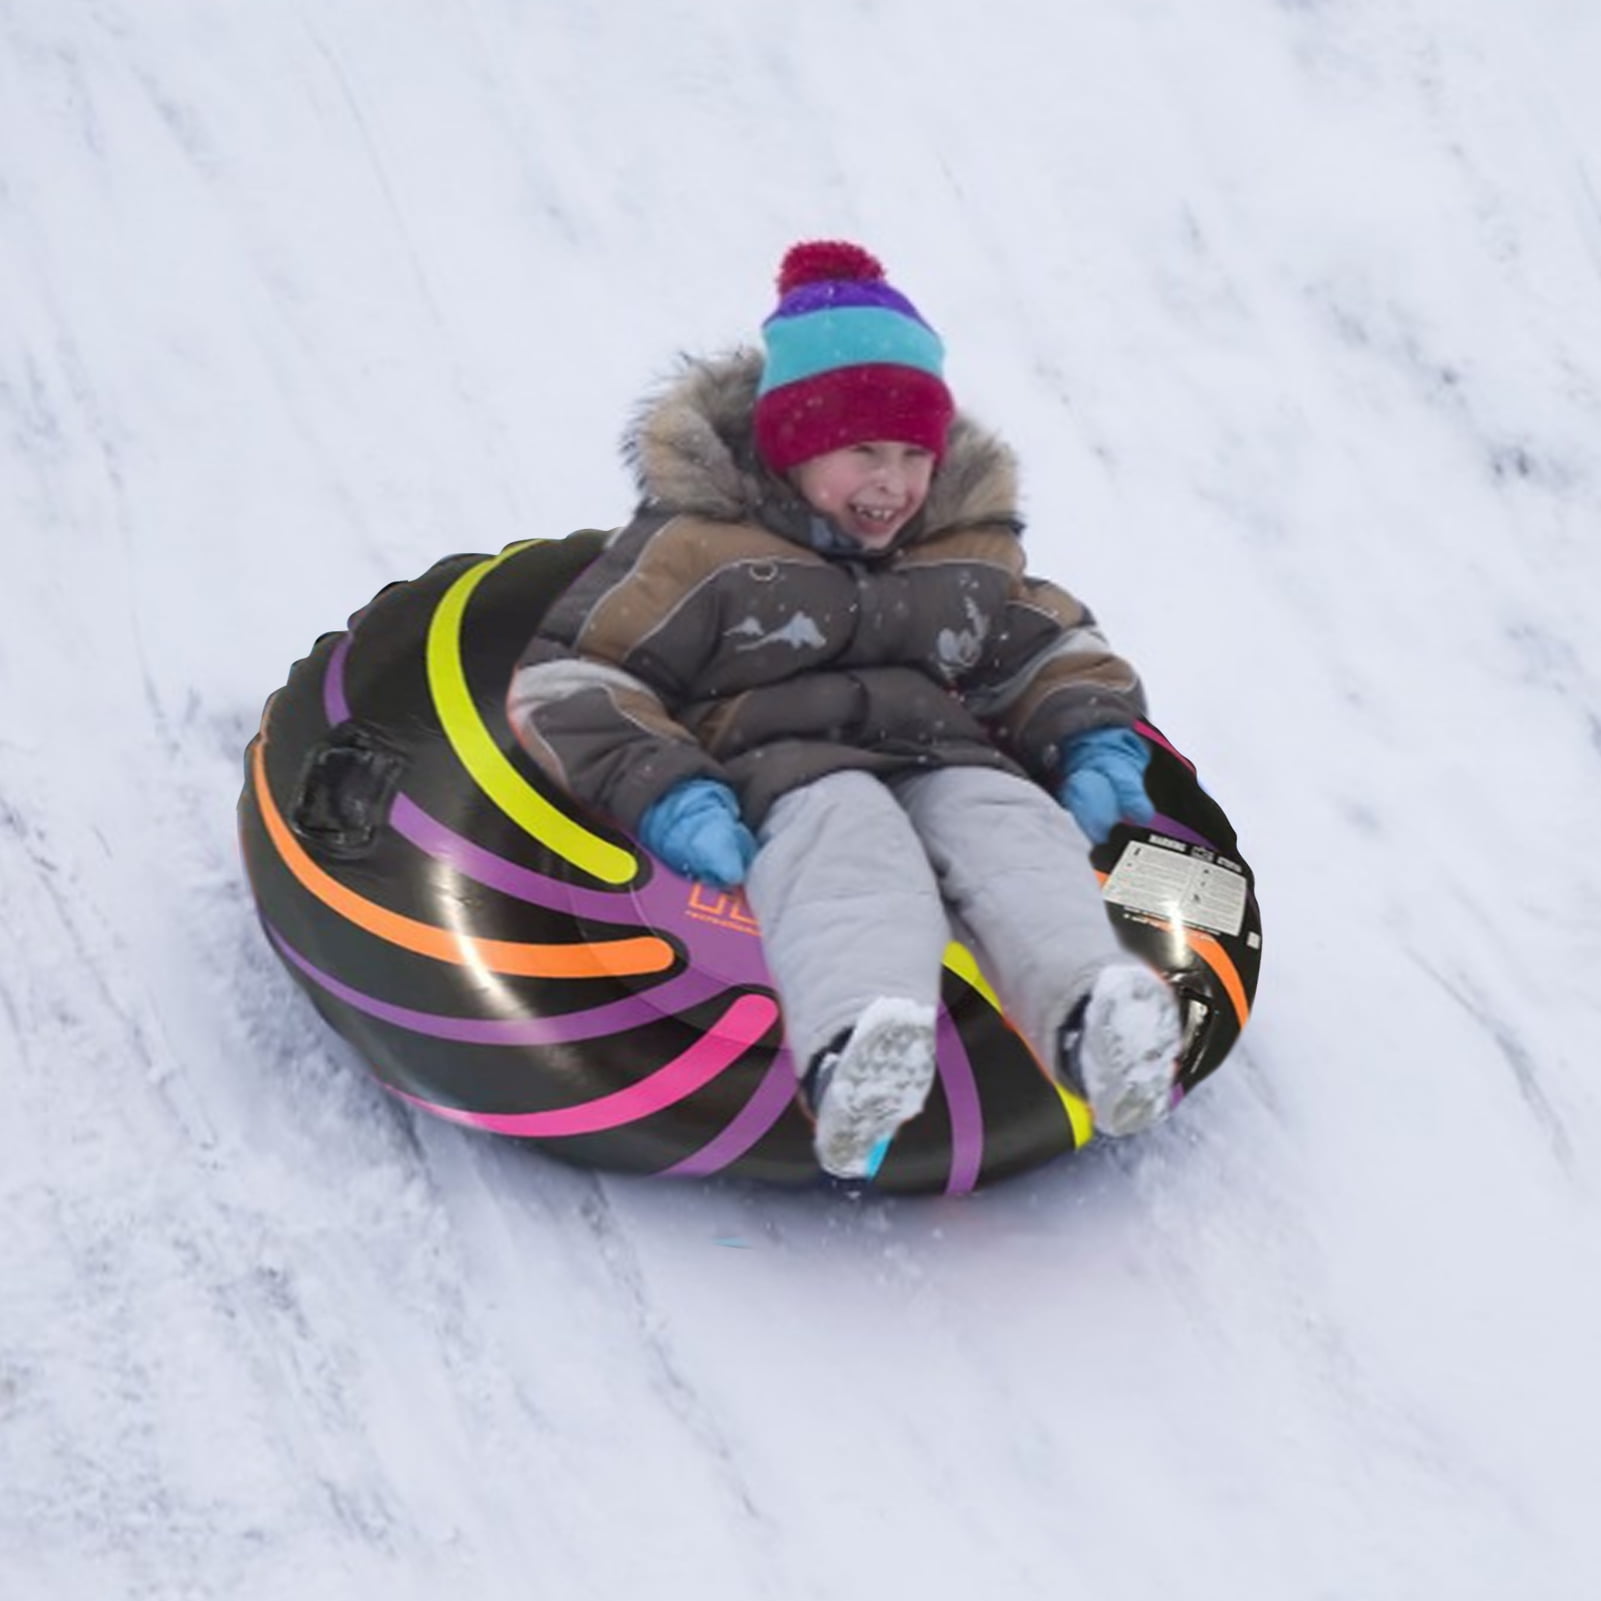 Alomejor Inflatable Snow Tube Inflatable Snow Sleds Winter Outdoor Floated Skiing Board Toy for Children Adults